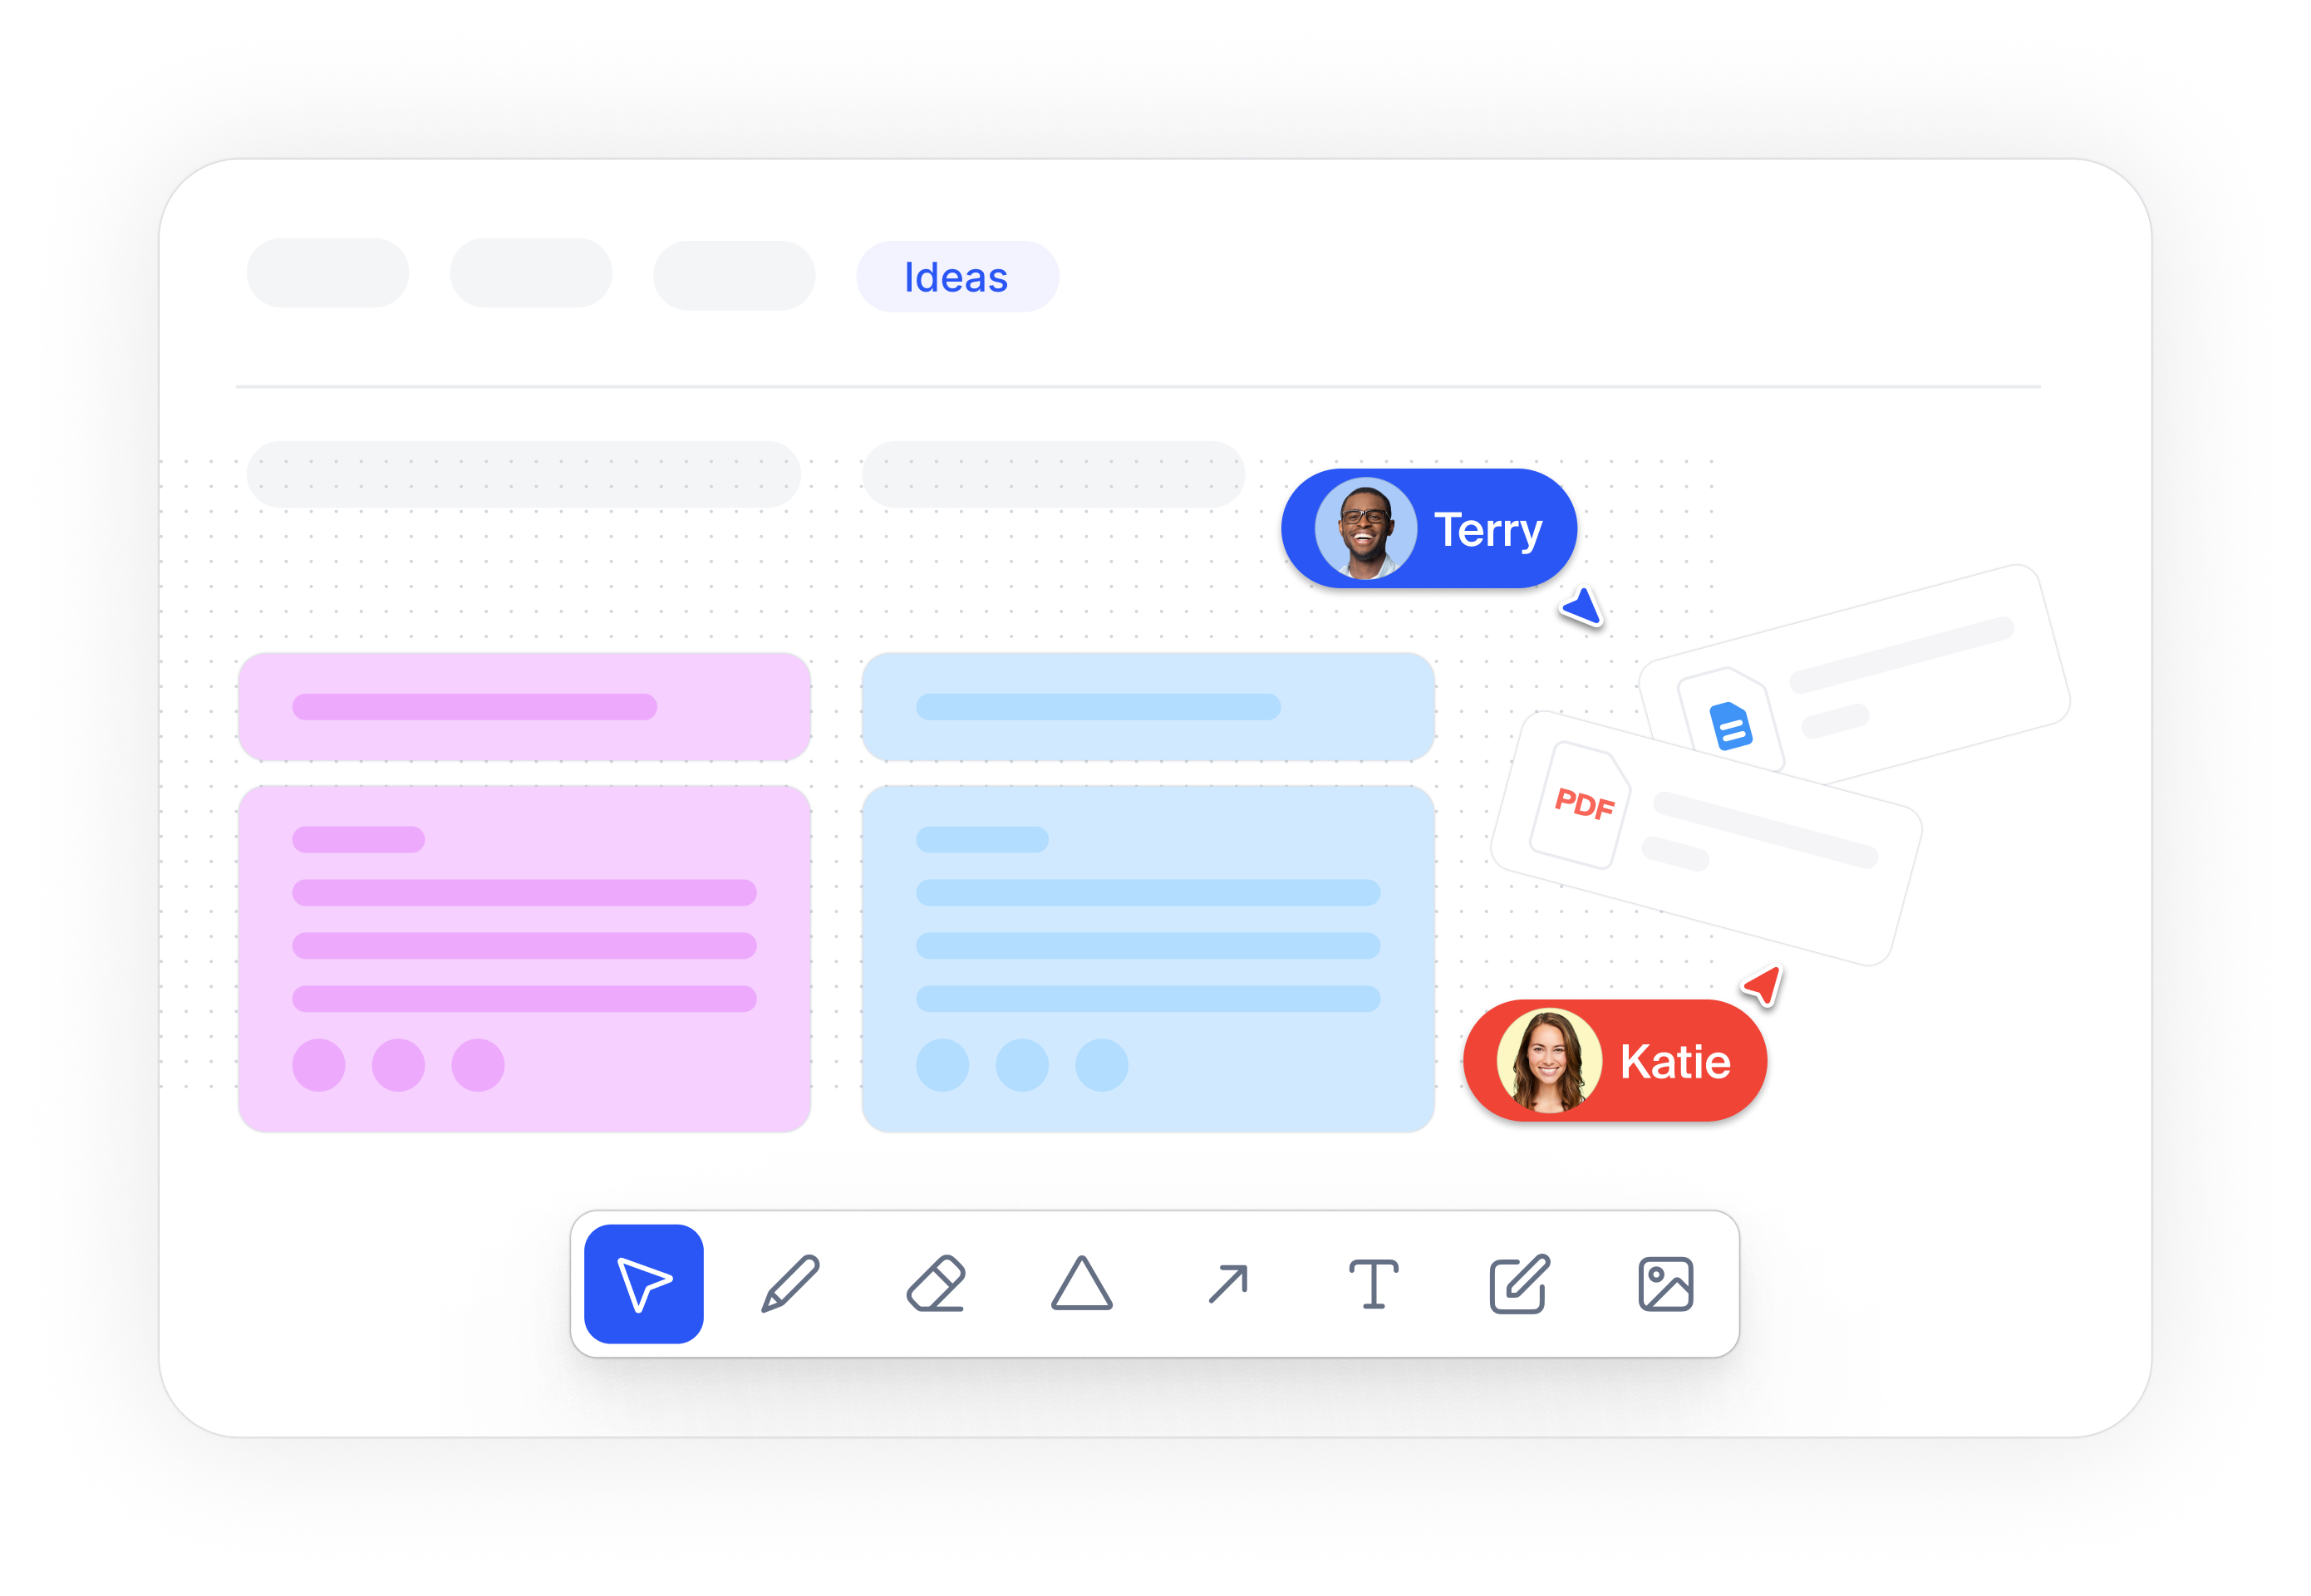 Share Ideas 💡 Being able to brainstorm and solicit timely feedback is a hallmark of great teamwork. Which is why Ledger includes a shared ideation space for real-time collaboration.